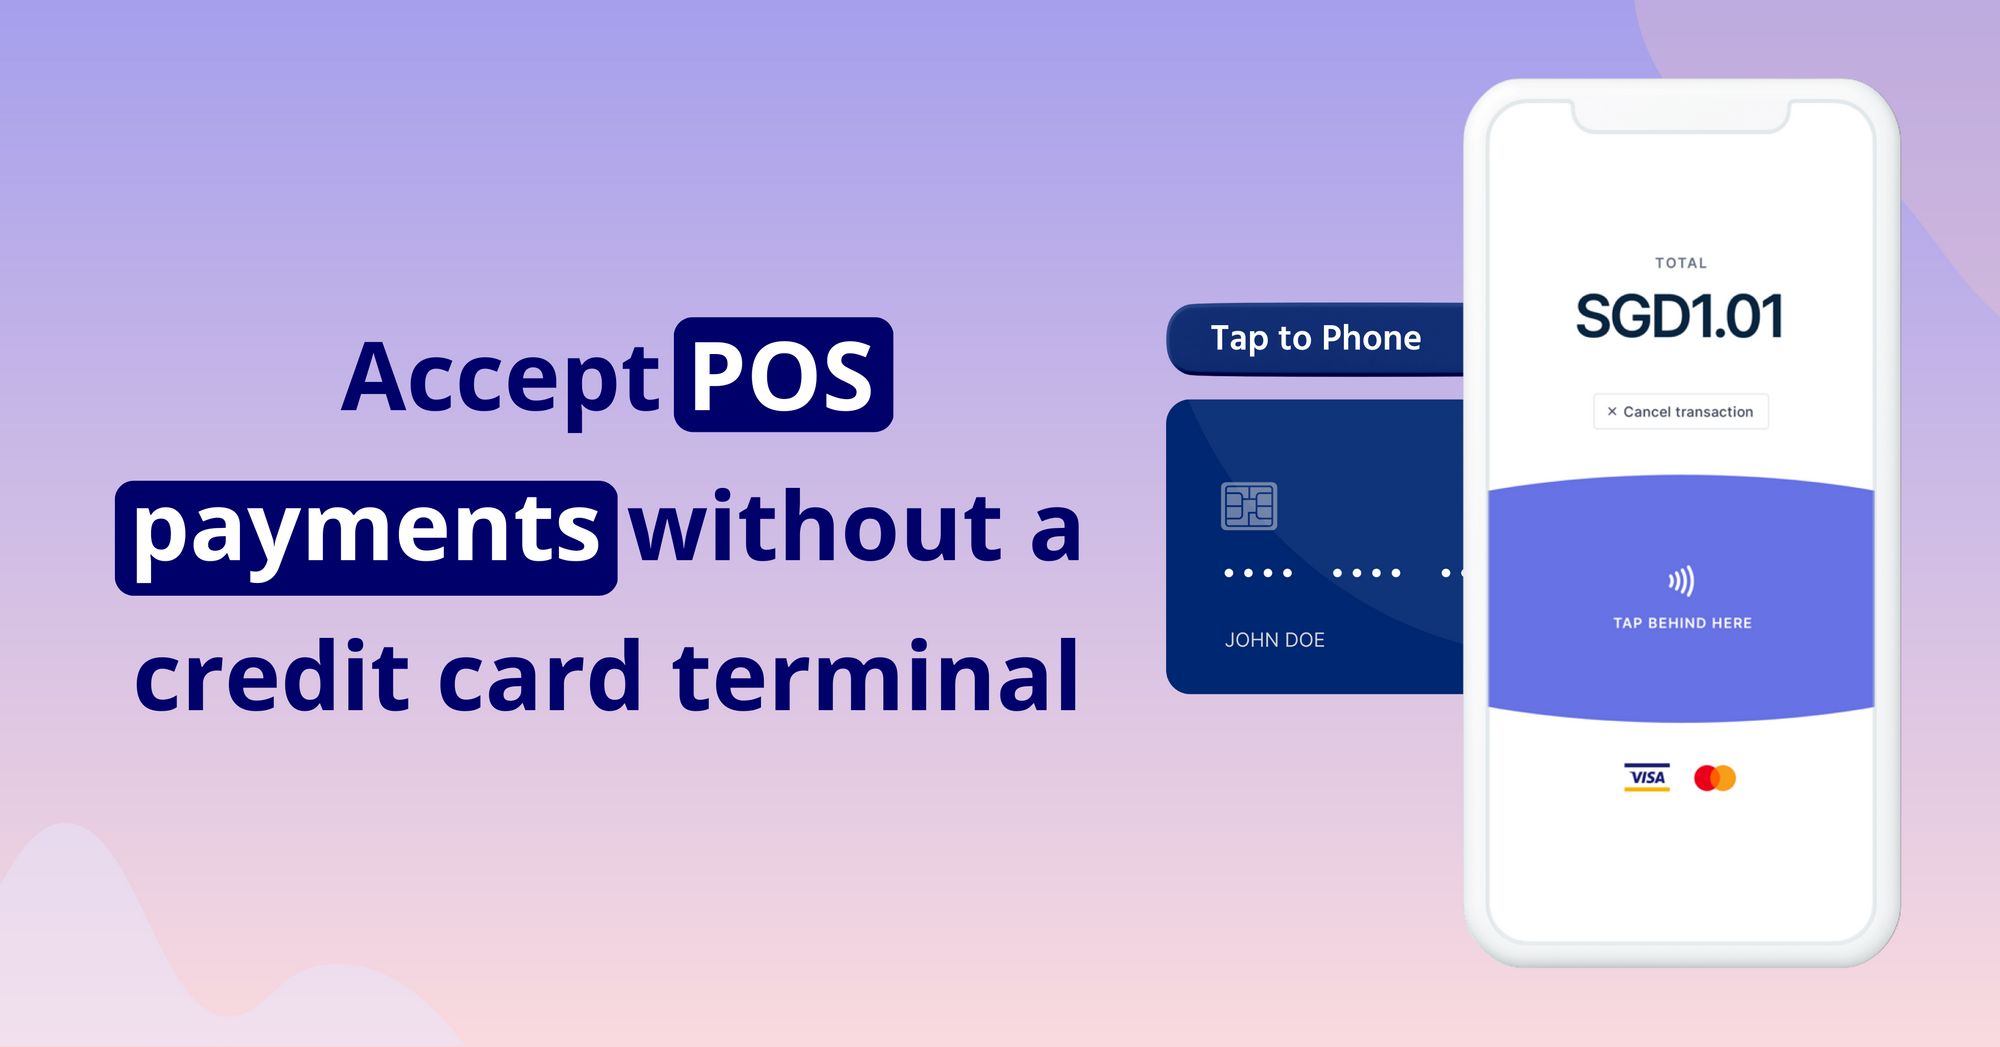 How to accept POS payments without a credit card terminal